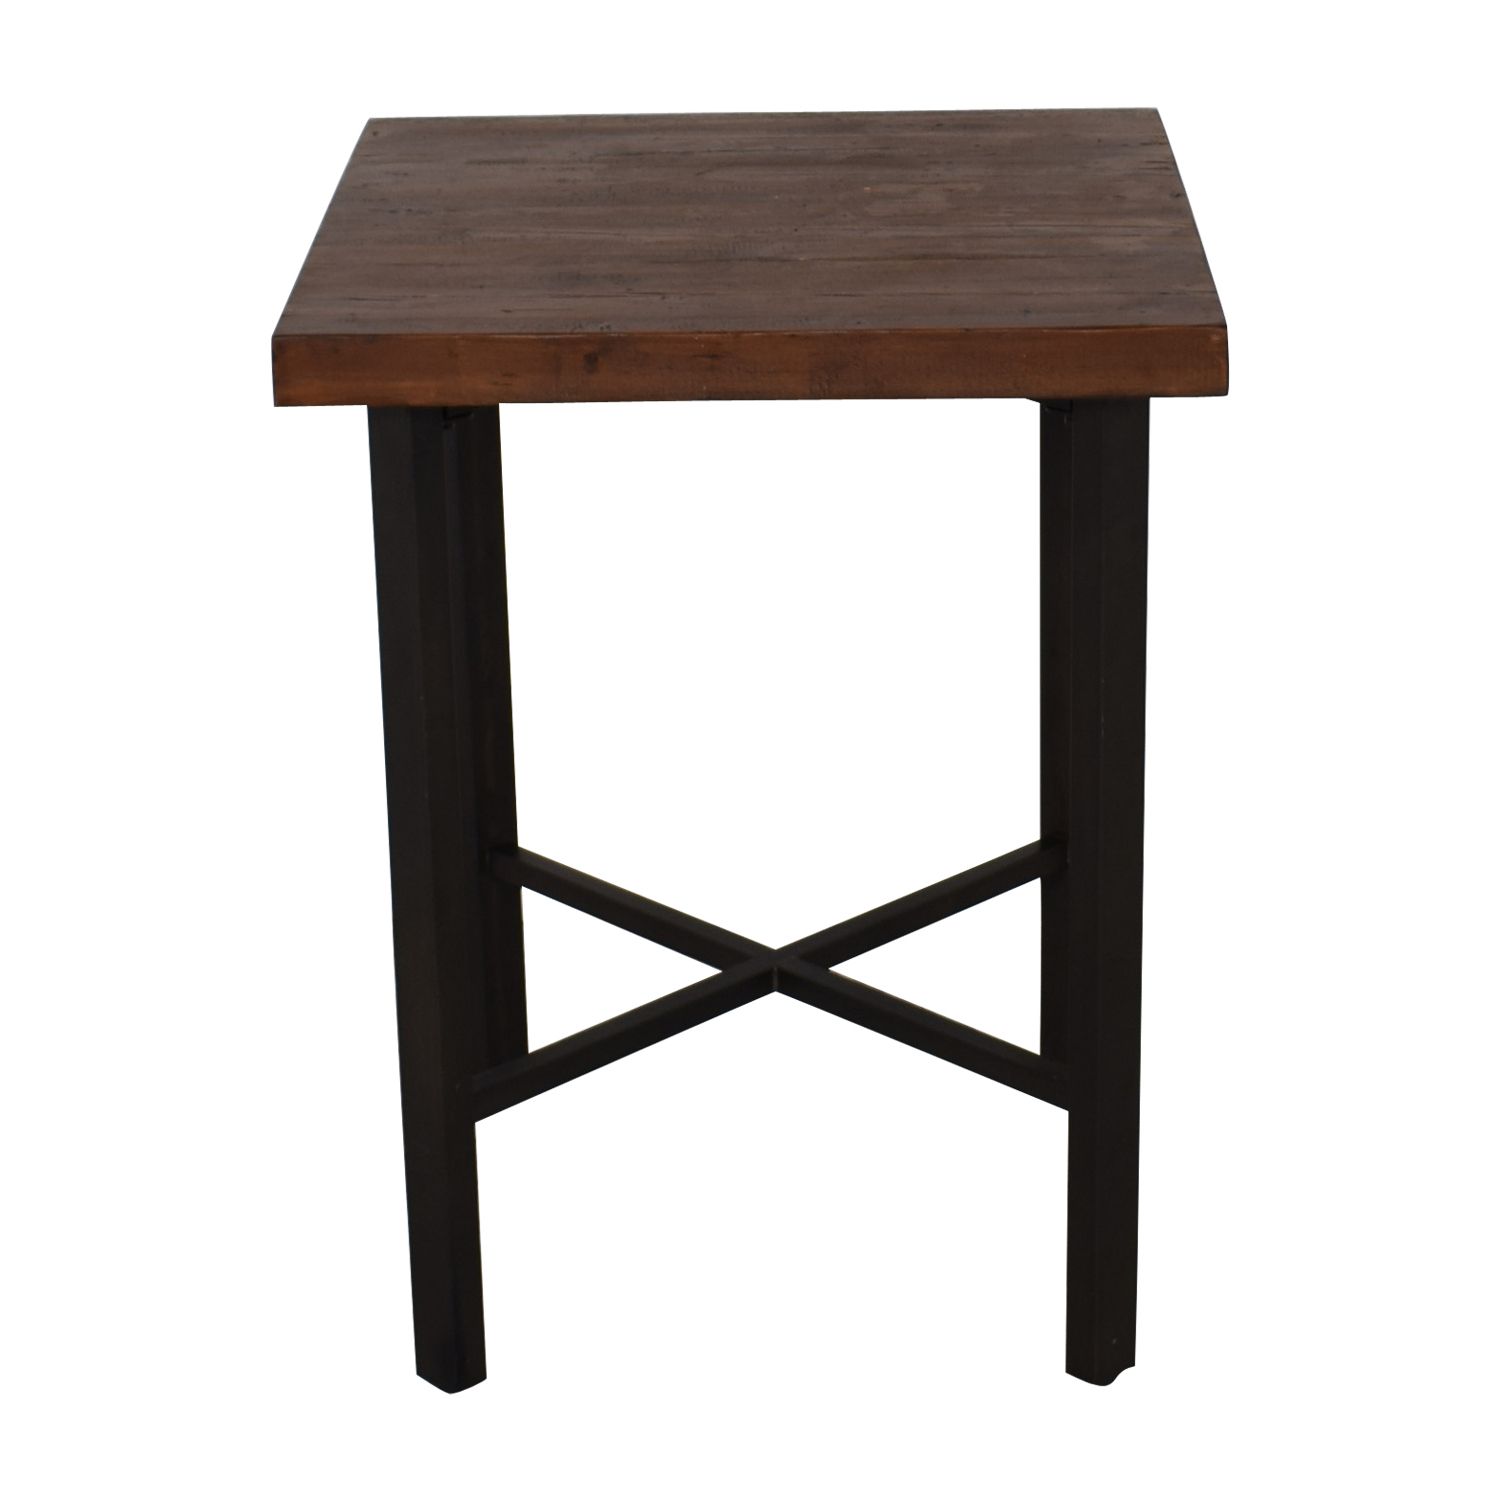 [%73% Off – Pottery Barn Pottery Barn Griffin Reclaimed Wood Bar Height Table  / Tables Regarding Popular Griffin Reclaimed Wood Bar Height Tables|Griffin Reclaimed Wood Bar Height Tables Pertaining To Widely Used 73% Off – Pottery Barn Pottery Barn Griffin Reclaimed Wood Bar Height Table  / Tables|Current Griffin Reclaimed Wood Bar Height Tables For 73% Off – Pottery Barn Pottery Barn Griffin Reclaimed Wood Bar Height Table  / Tables|Favorite 73% Off – Pottery Barn Pottery Barn Griffin Reclaimed Wood Bar Height Table  / Tables Within Griffin Reclaimed Wood Bar Height Tables%] (View 1 of 25)